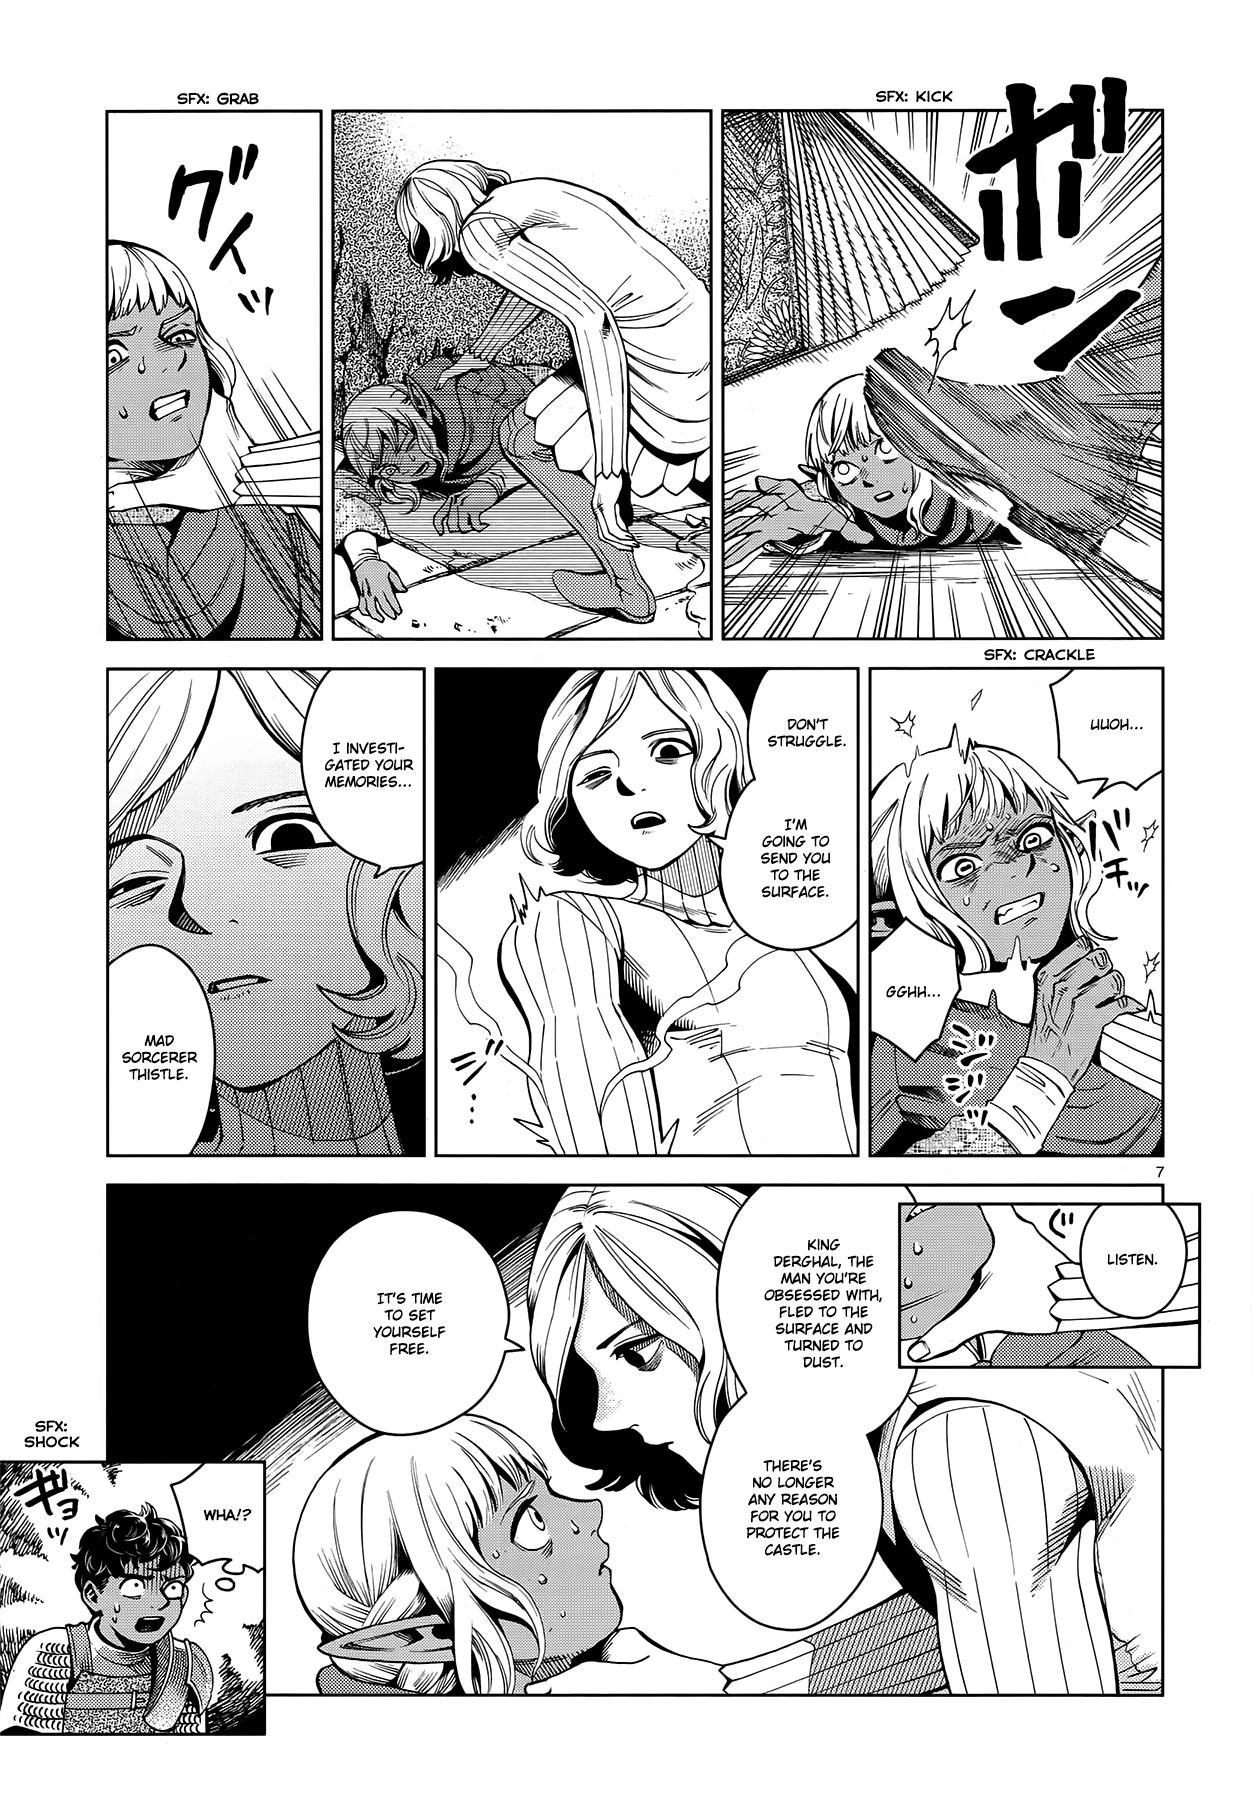 Dungeon Meshi Chapter 55: On The 1St Level, Part Iii page 7 - Mangakakalot